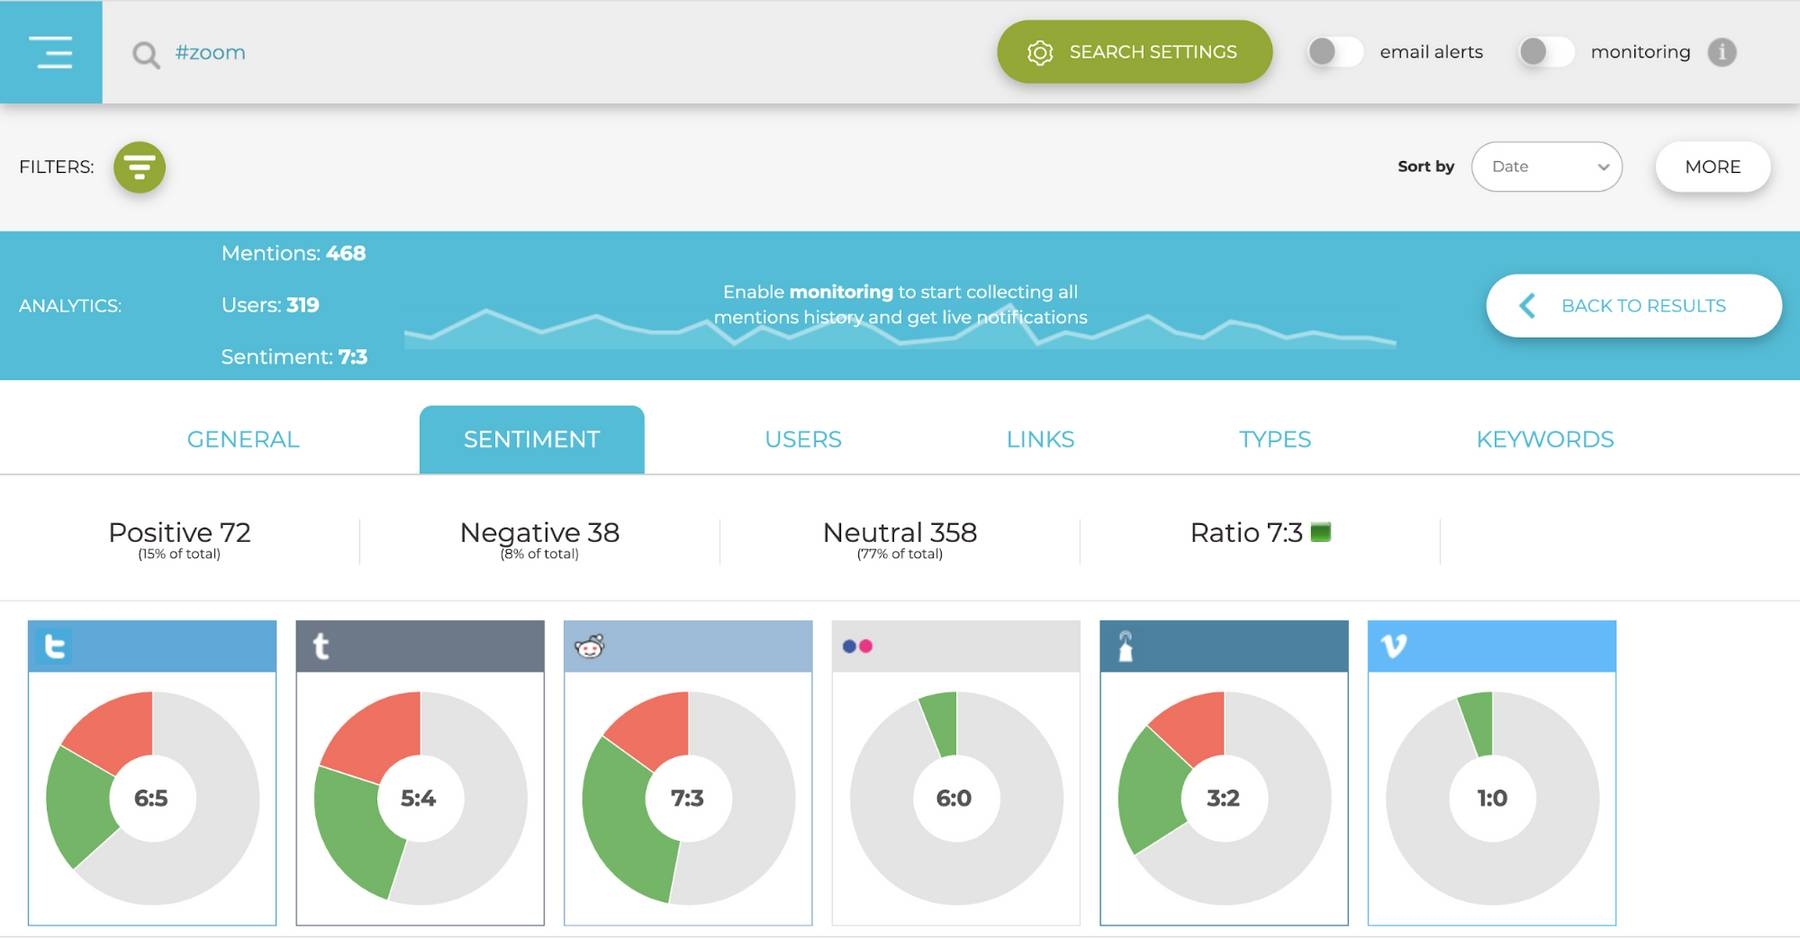 Social Searcher's analytics dashboard showing overall sentiment on each social media platform: Facebook, Reddit, Twitter, Vimeo, and more.